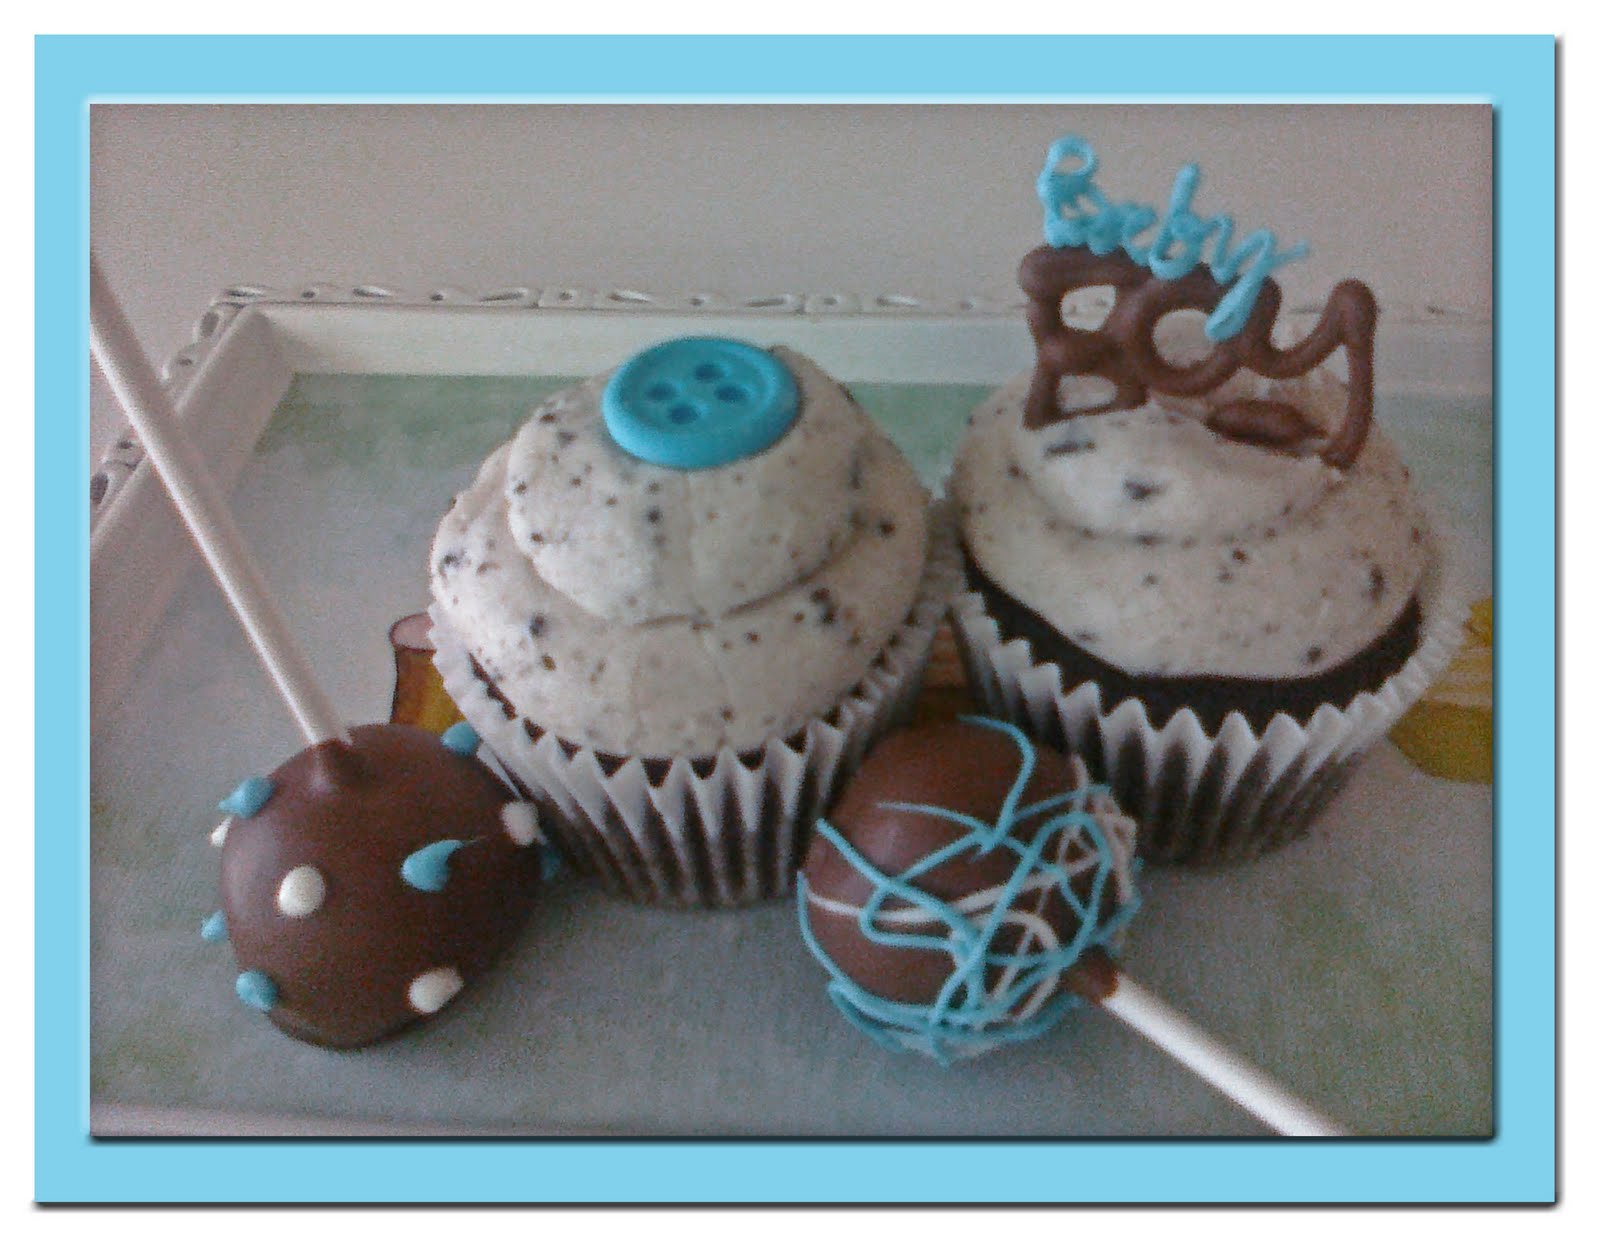 baby shower cake pops recipe were darling! Cookies N' Cream Cake pops and cupcakes, the Baby 